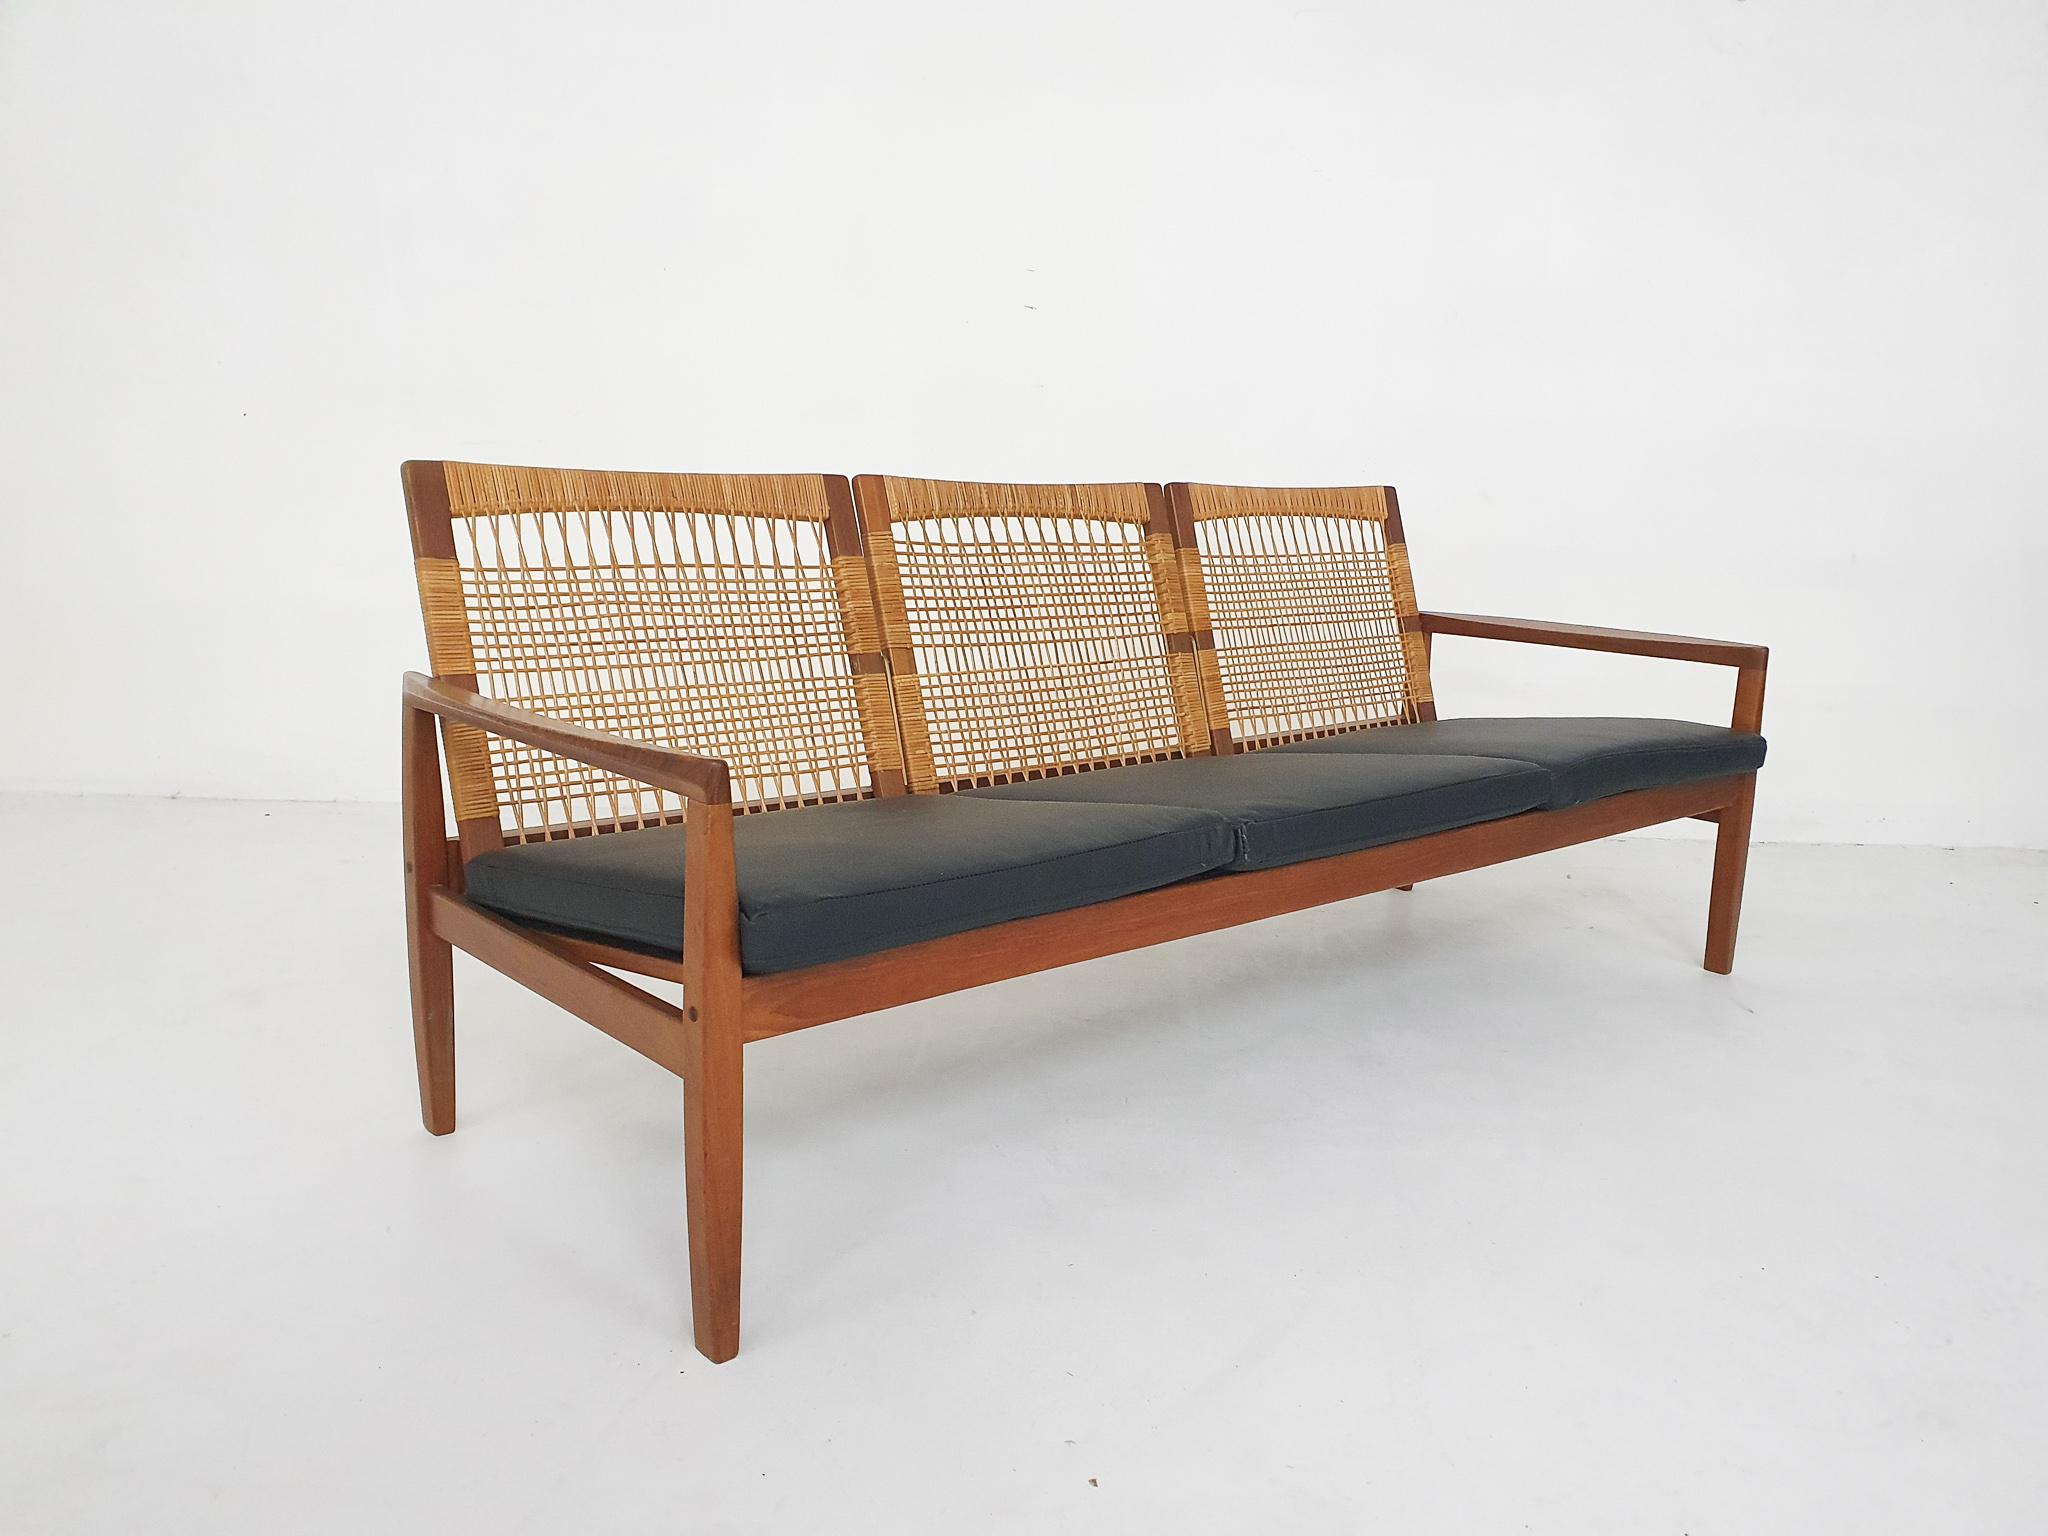 Indulge in timeless elegance with our vintage design sofa crafted by the iconic Hans Olsen and produced by Juul Kristensen. This exquisite piece from the 1950's seamlessly blends mid-century charm with contemporary appeal, featuring quality teak